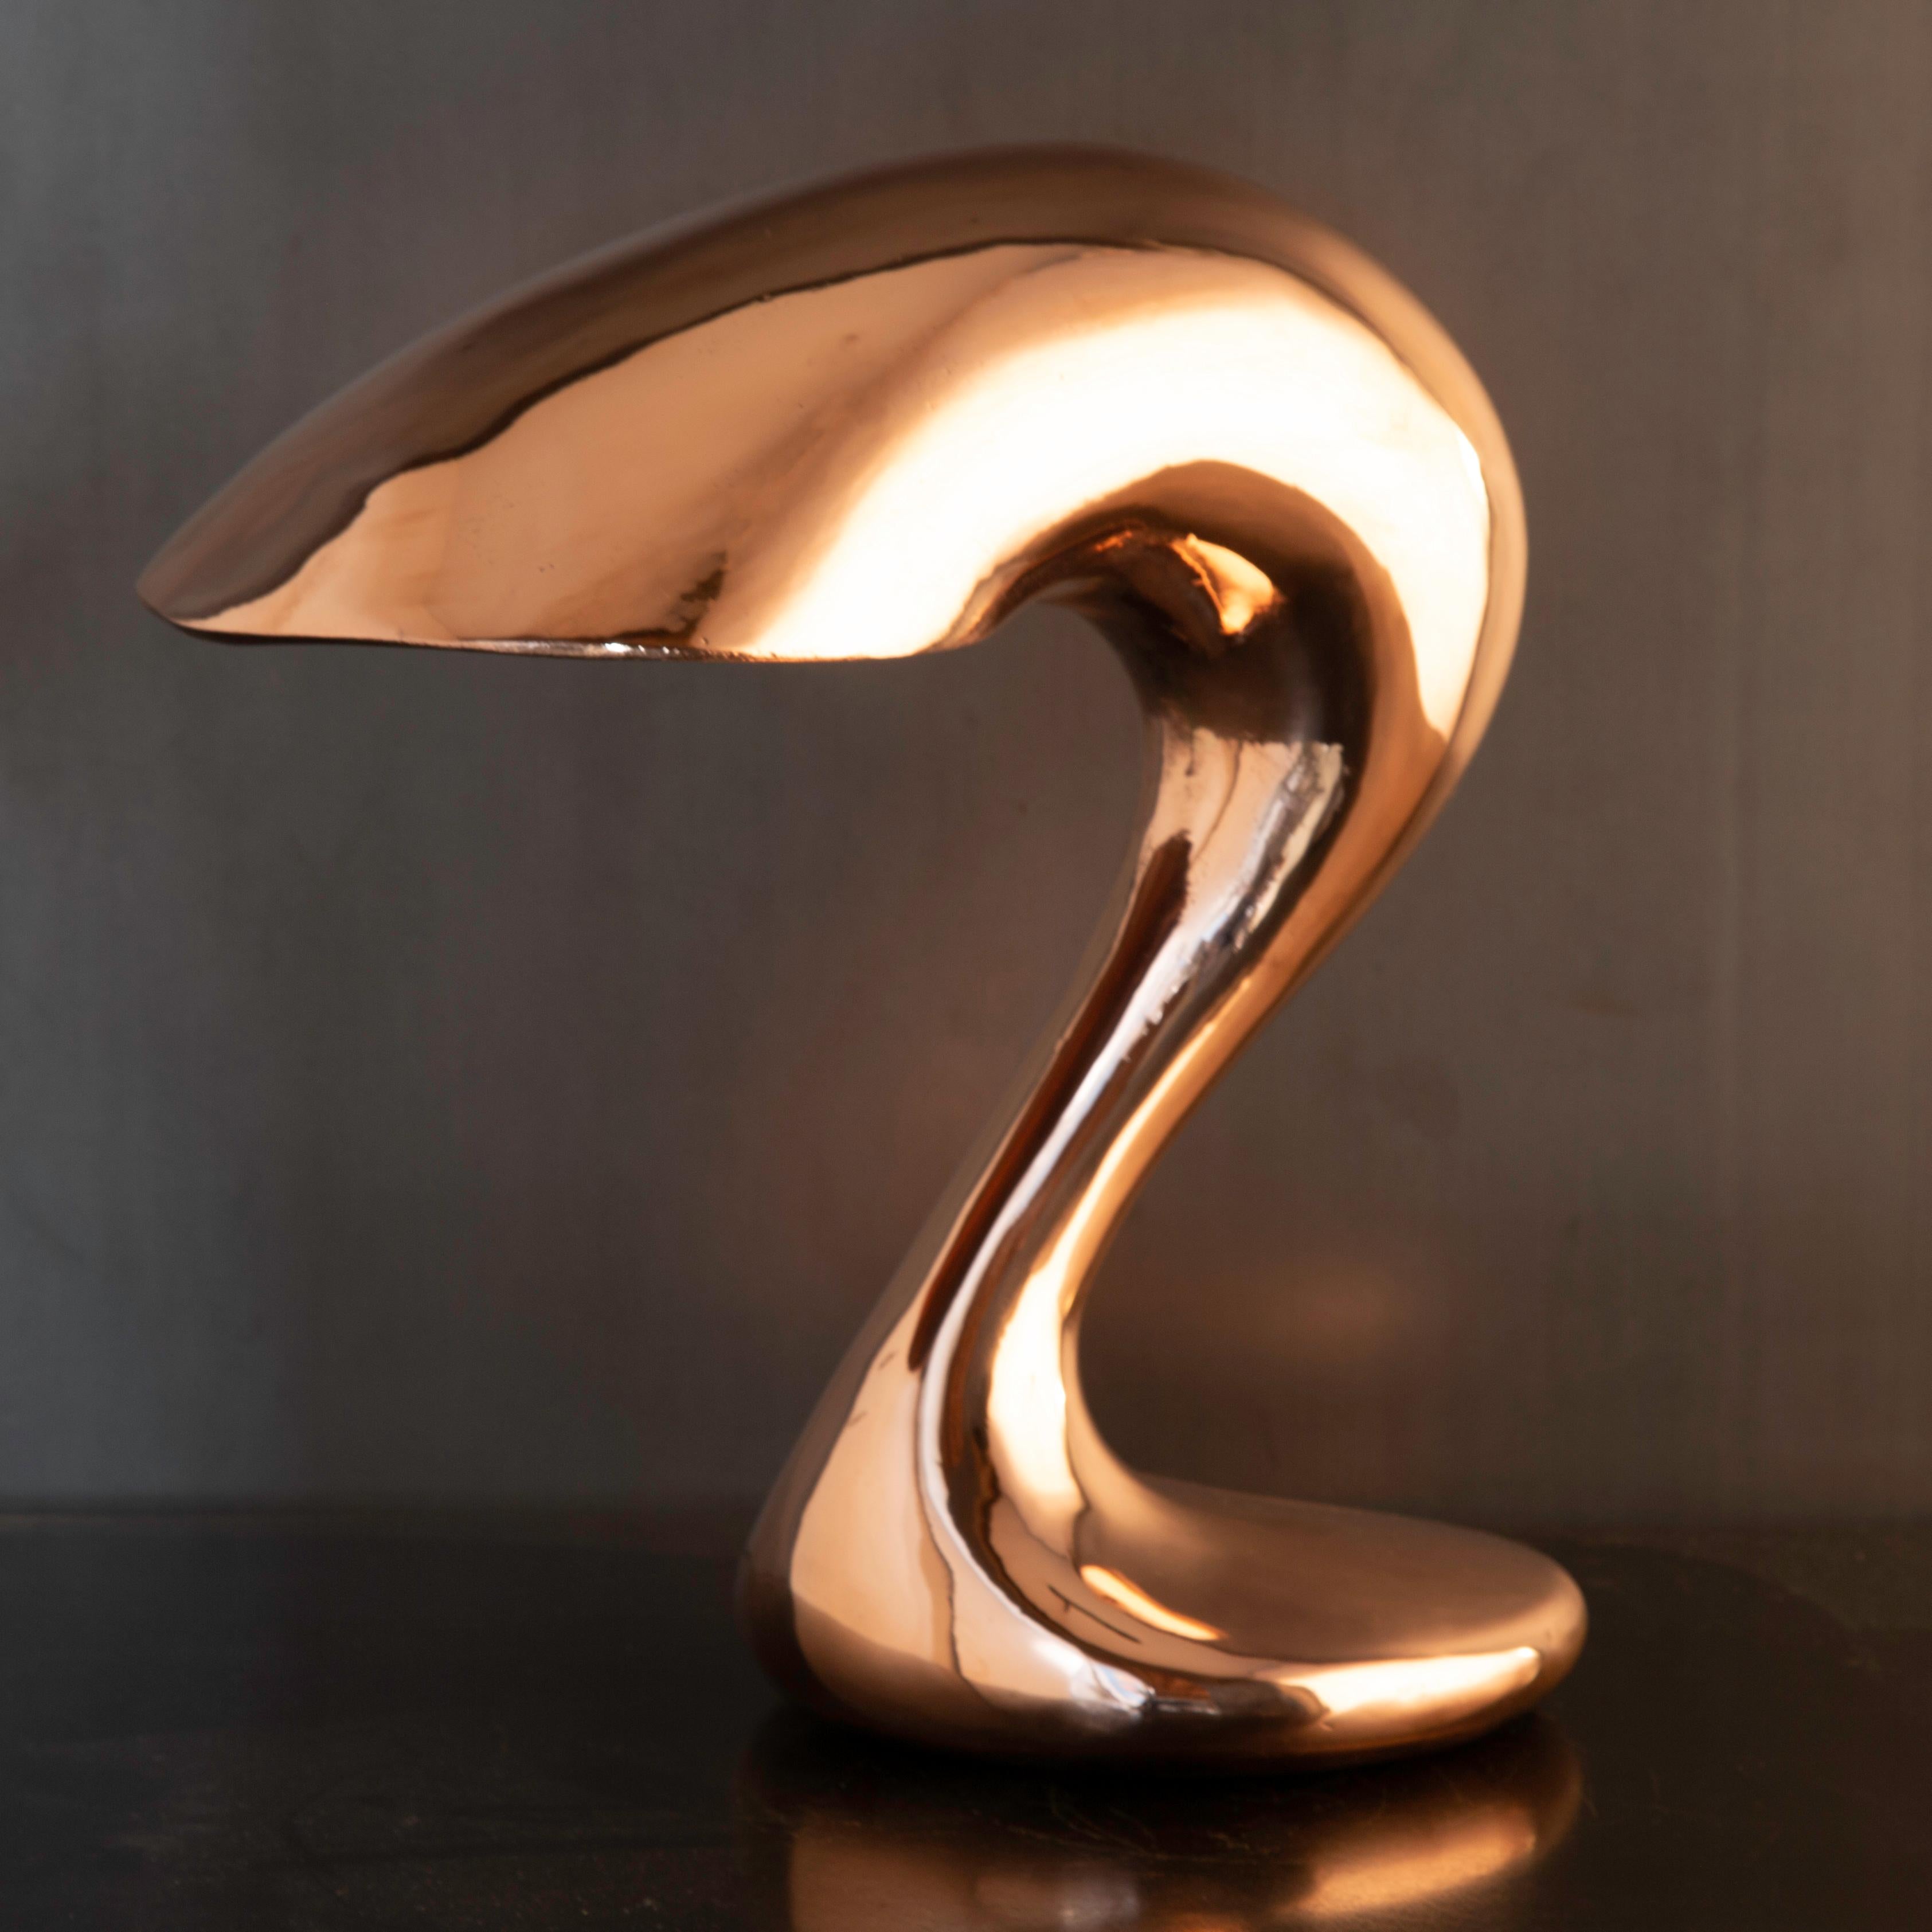 Table lamp: Eliza's big question in rare polished cast recycled copper. Originally made in Chicago in 1992. Inspired by the artist's inquisitive daughter. This 2004 version was created for the conversion of a foundry into the East Hotel in Hamburg,